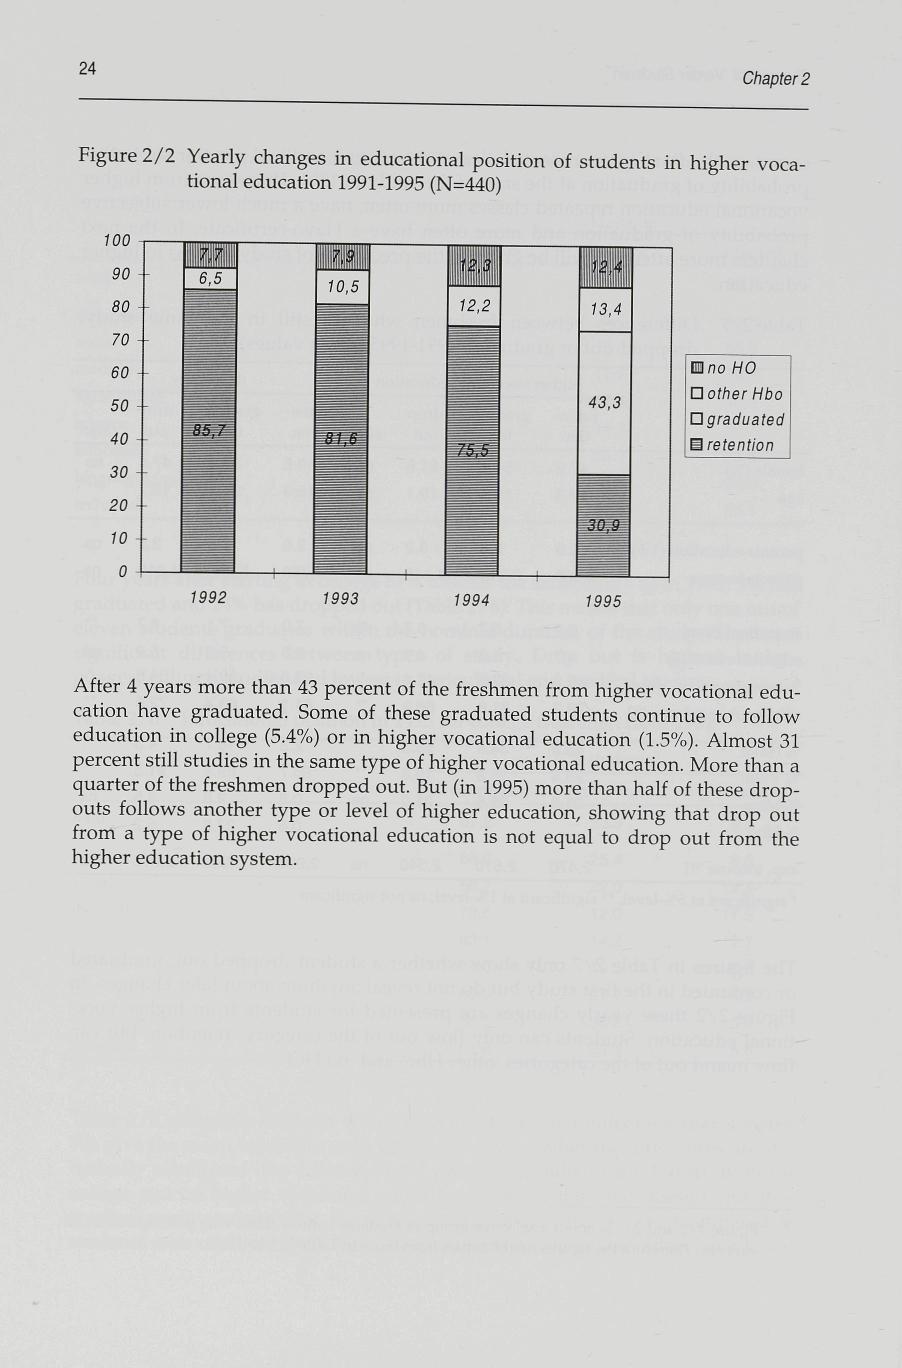 24 Chapter 2 Figure 2/2 Yearly changes in educational position of students in higher vocational education 1991-1995 (N=440) no HO Dother Hbo Ograduated M retention 1992 1993 1994 1995 After 4 years